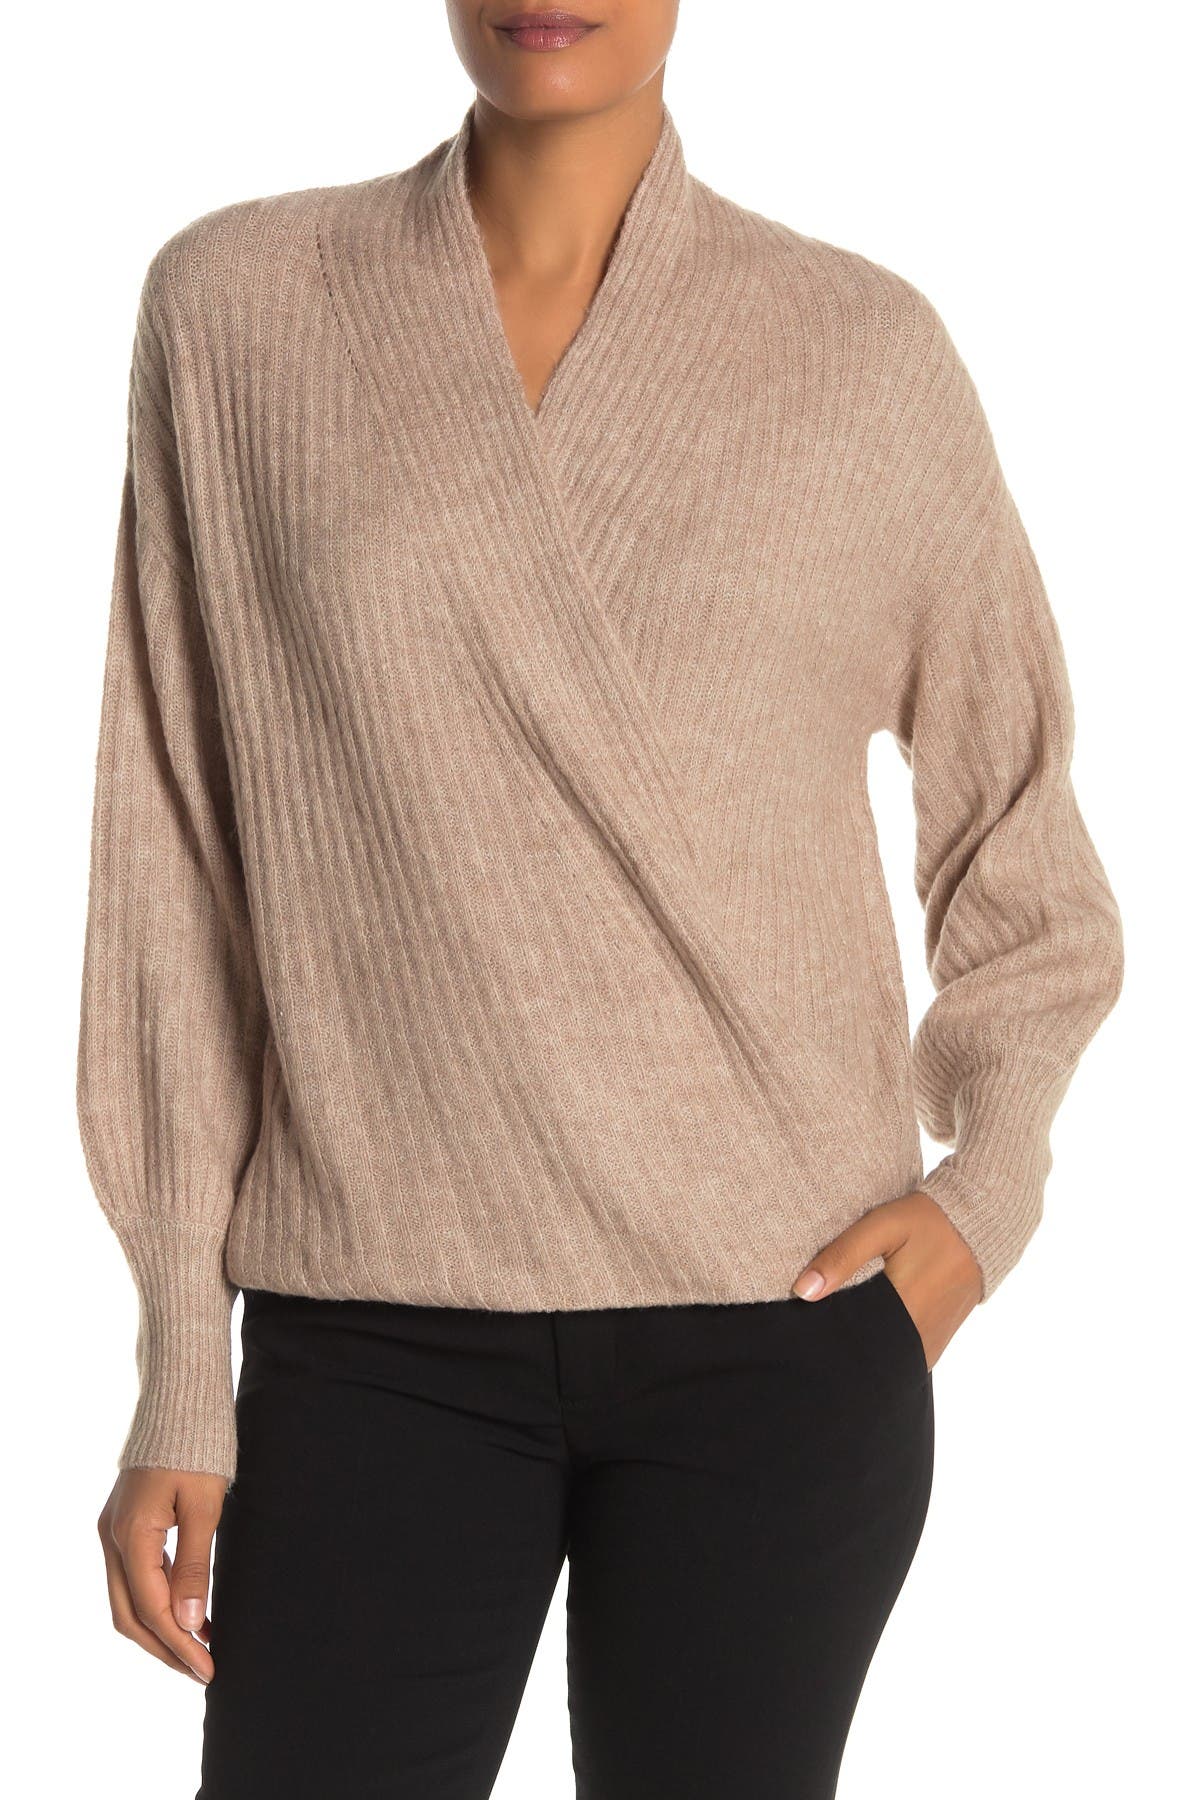 Max Studio | Ribbed Knit Wrap Sweater | Nordstrom Rack